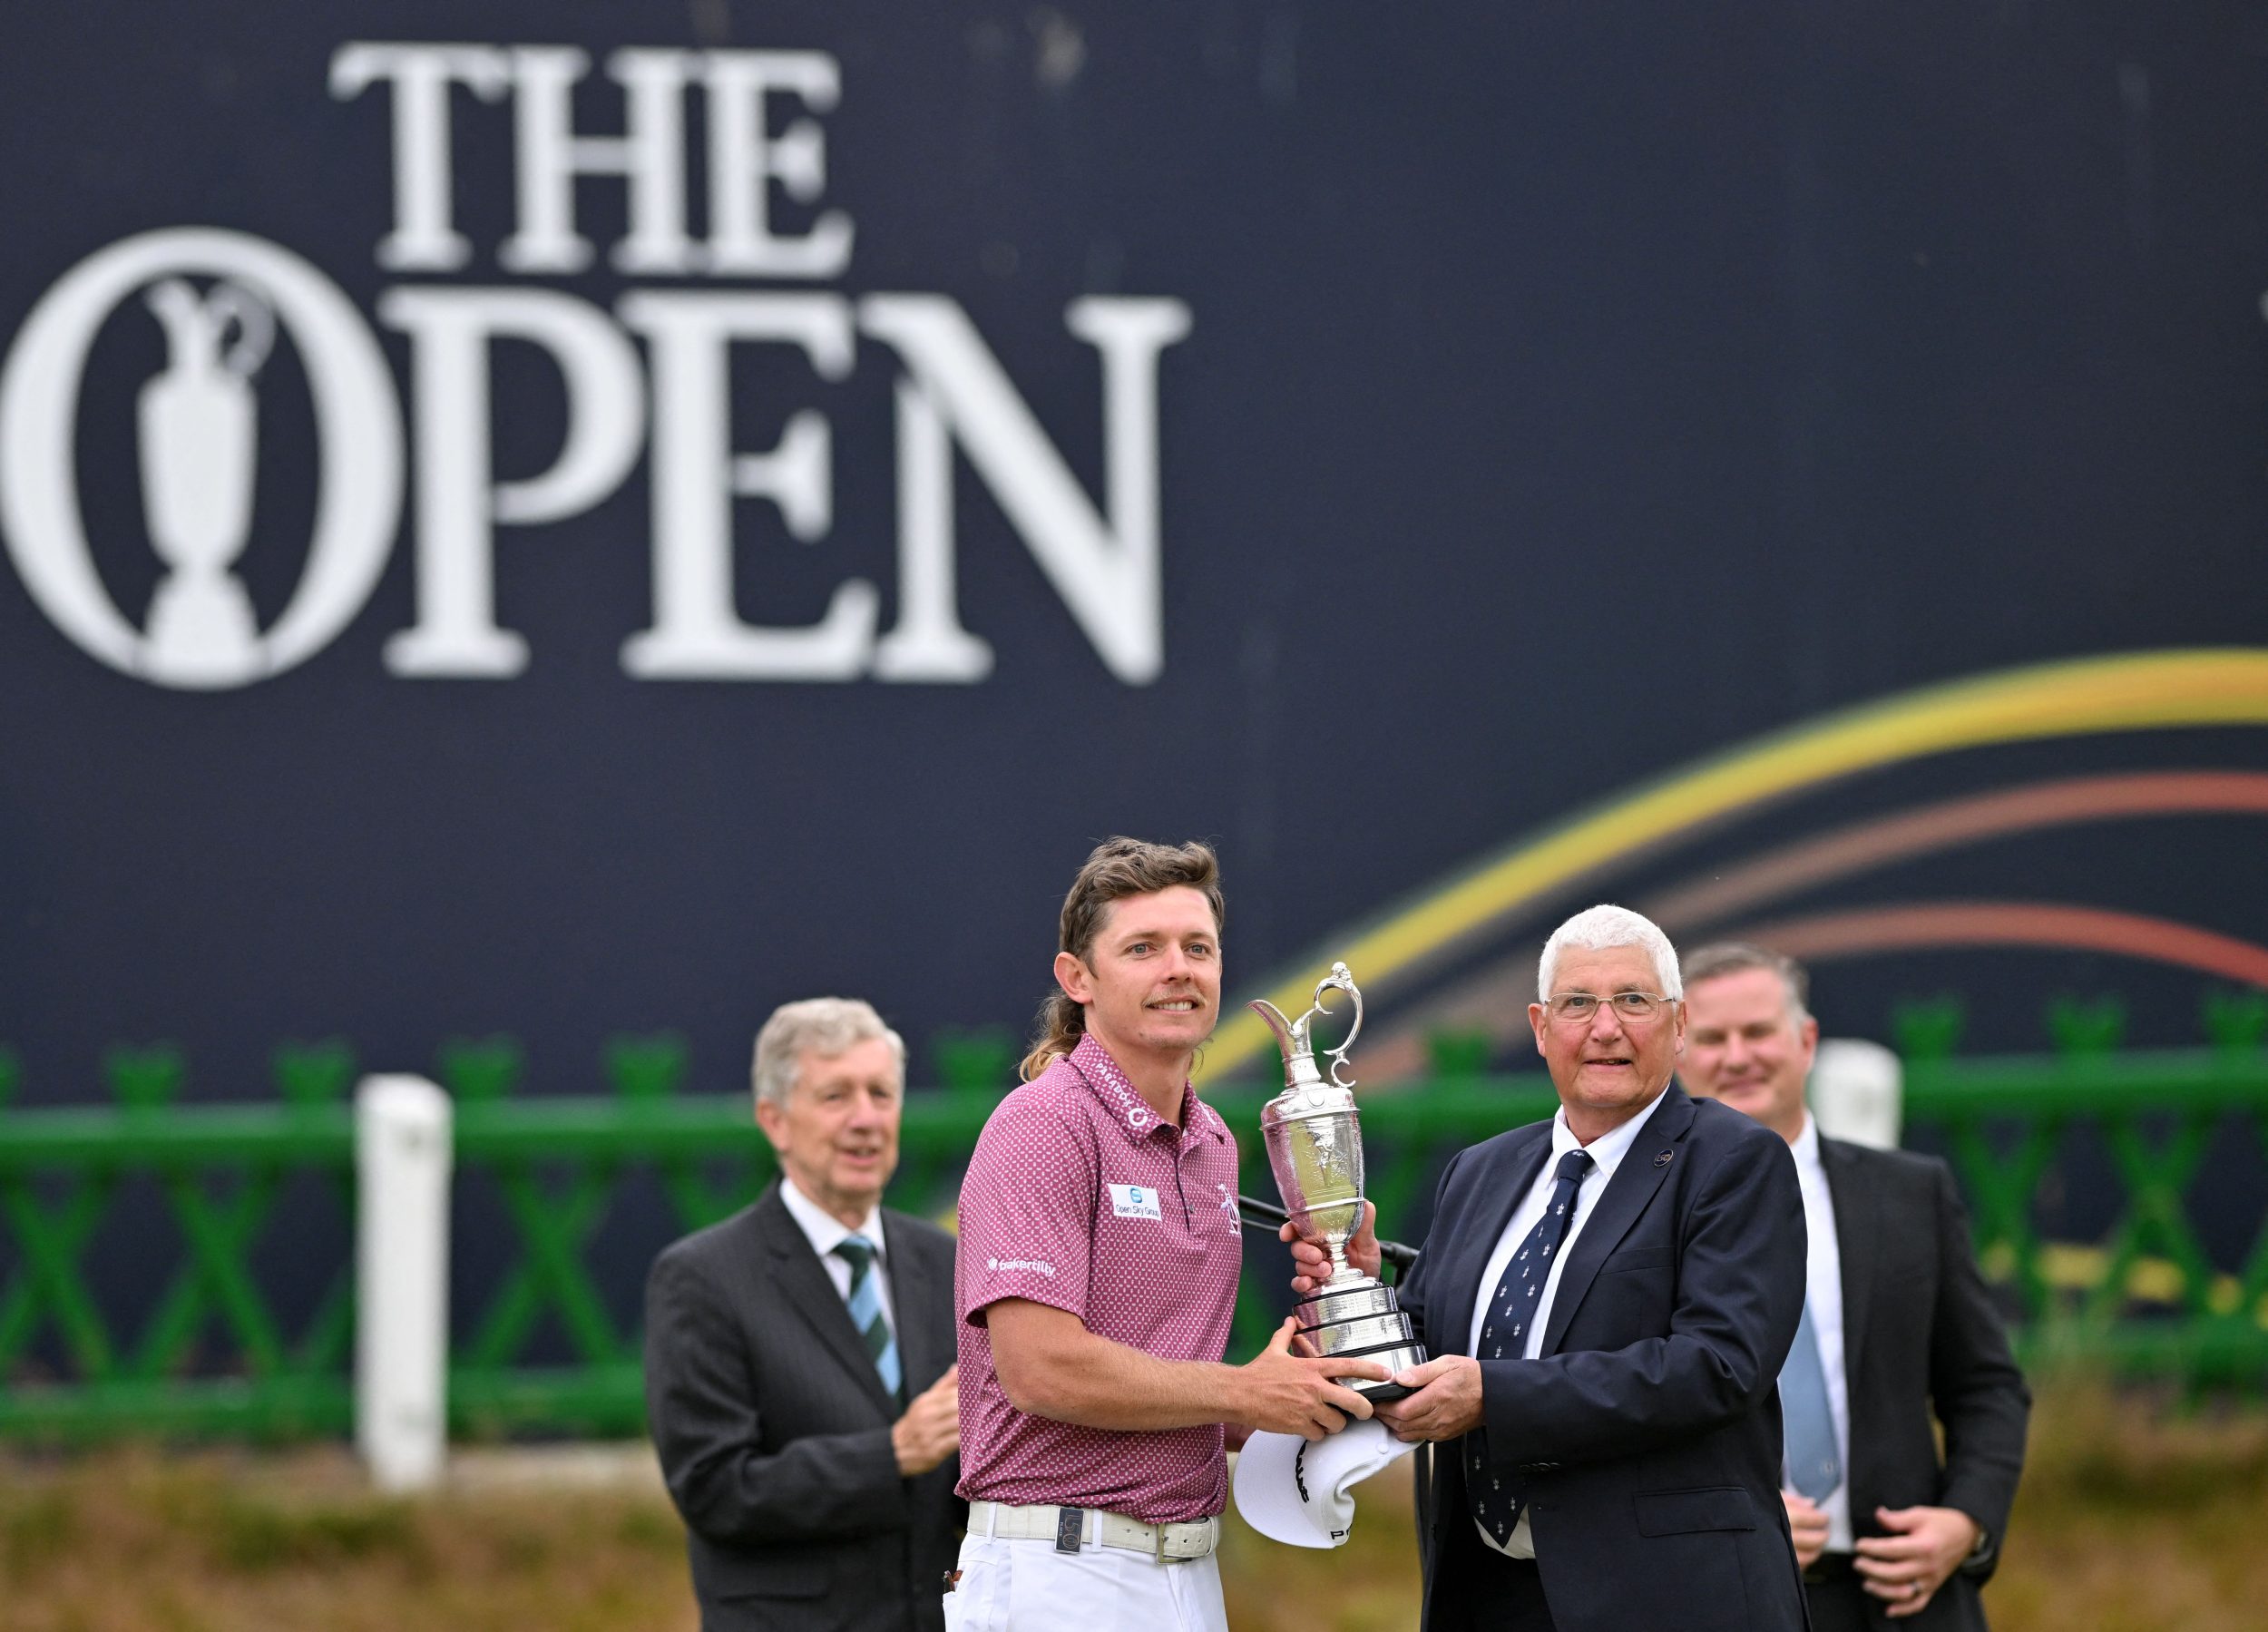 Cameron Smith holds the trophy at The Open Championship.